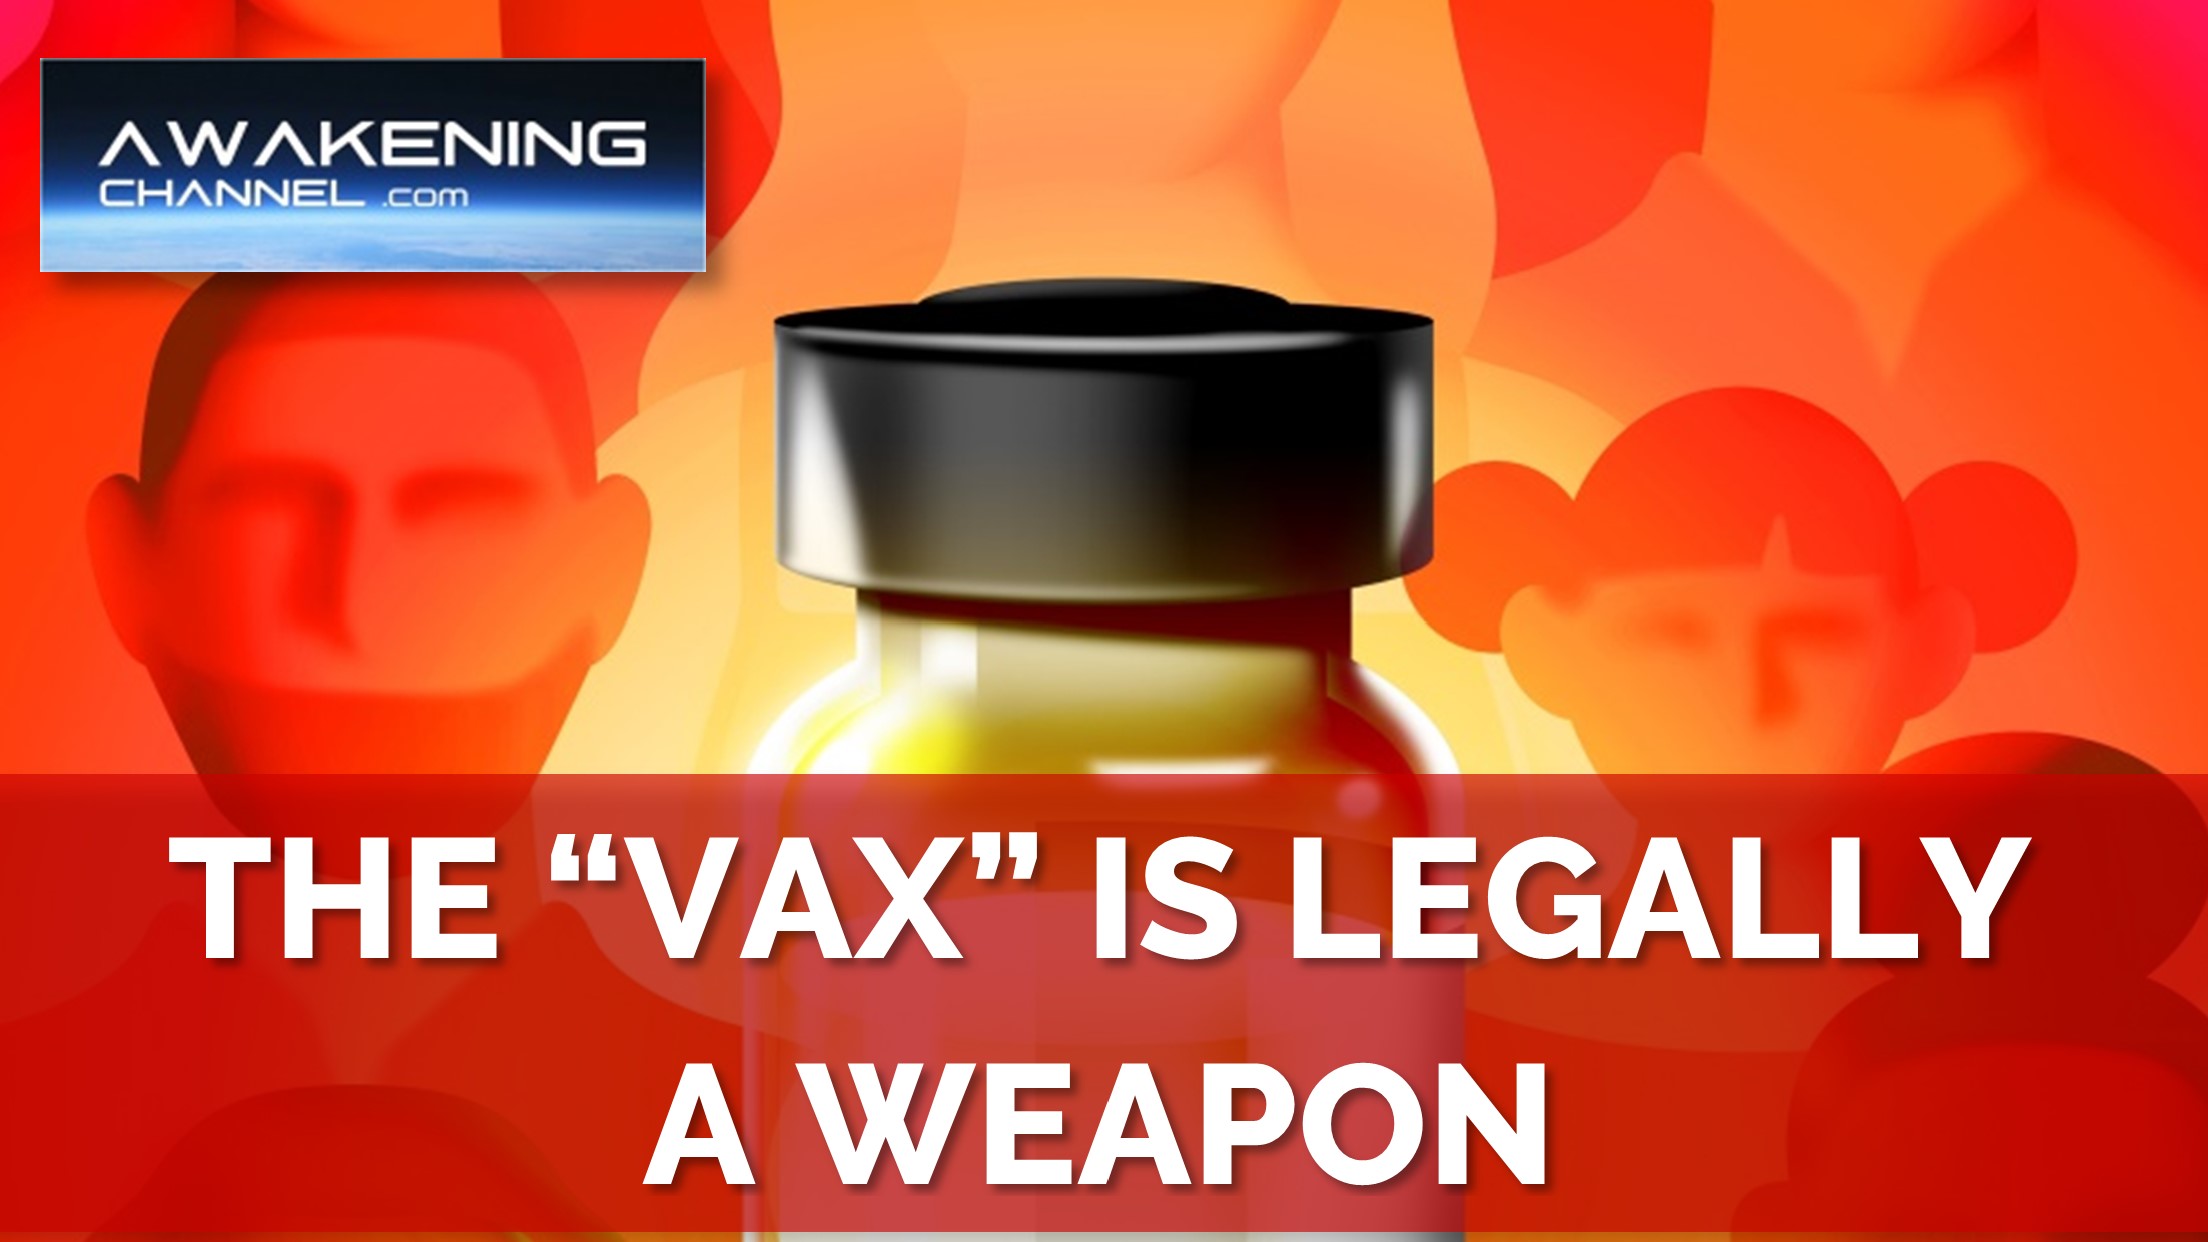 The “Vax” Is Legally a Weapon